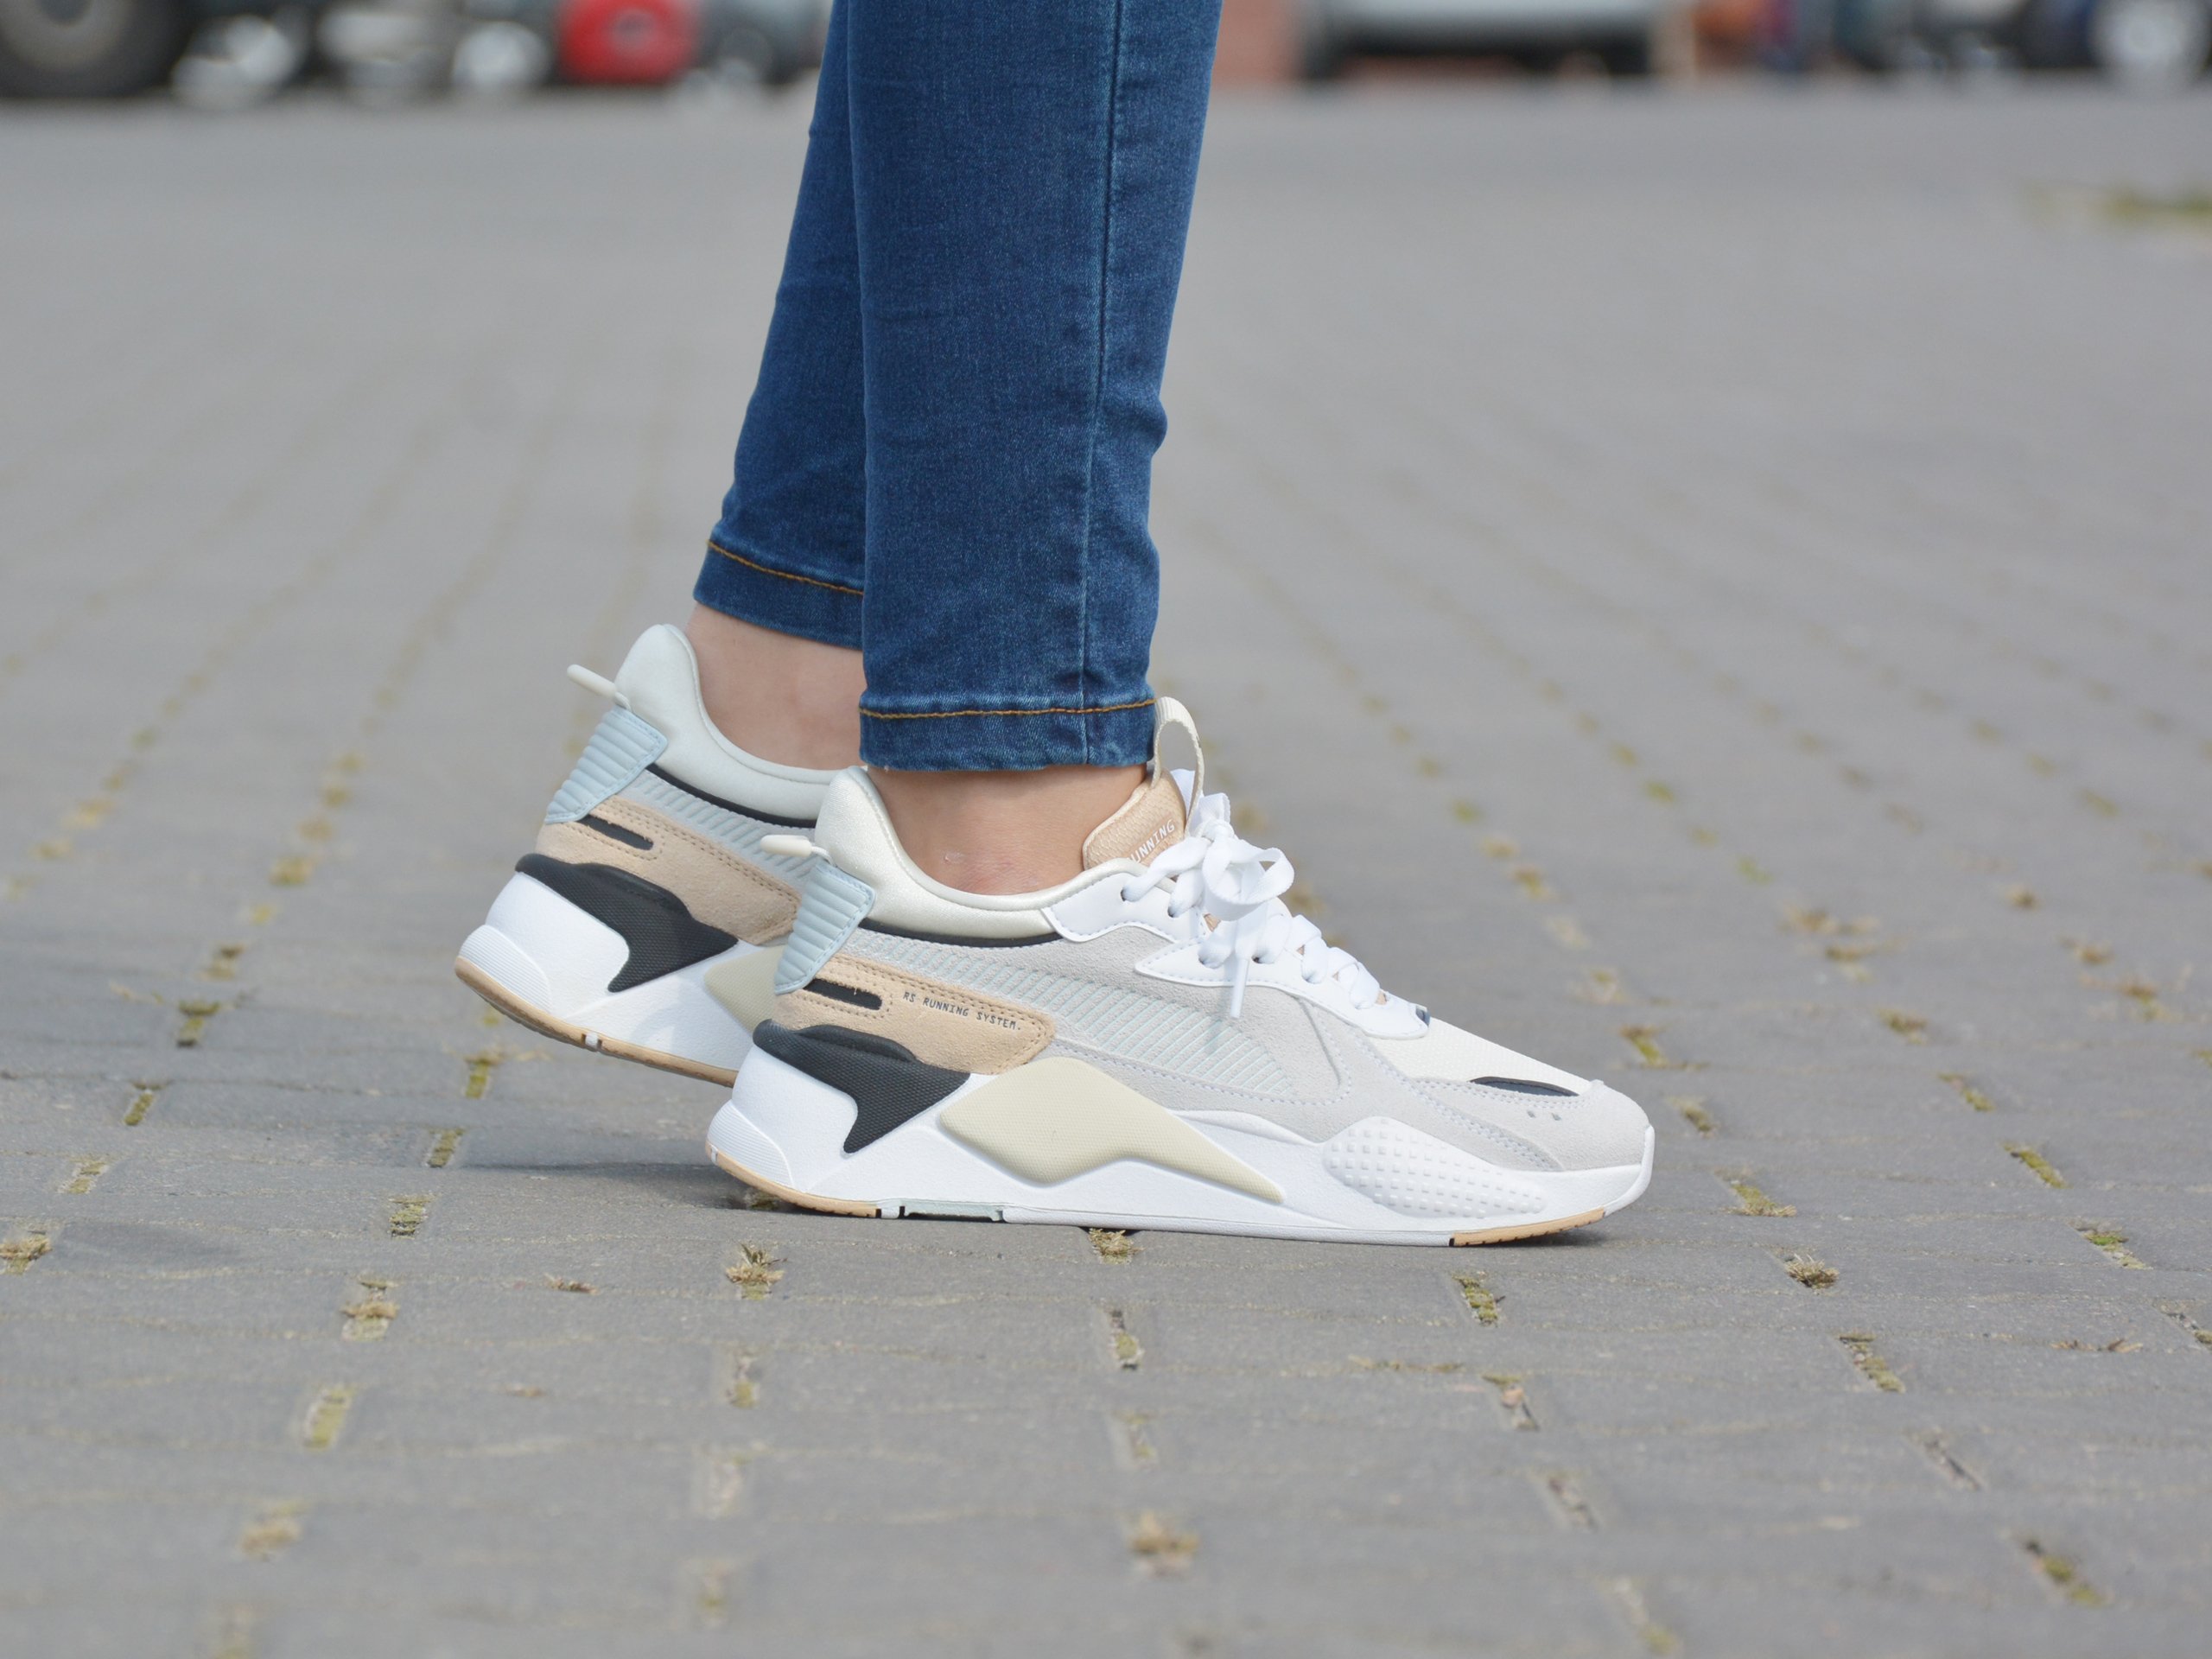 Puma - RS-X Reinvent 371008-05 - Sneakers - White / Beige / Grey 